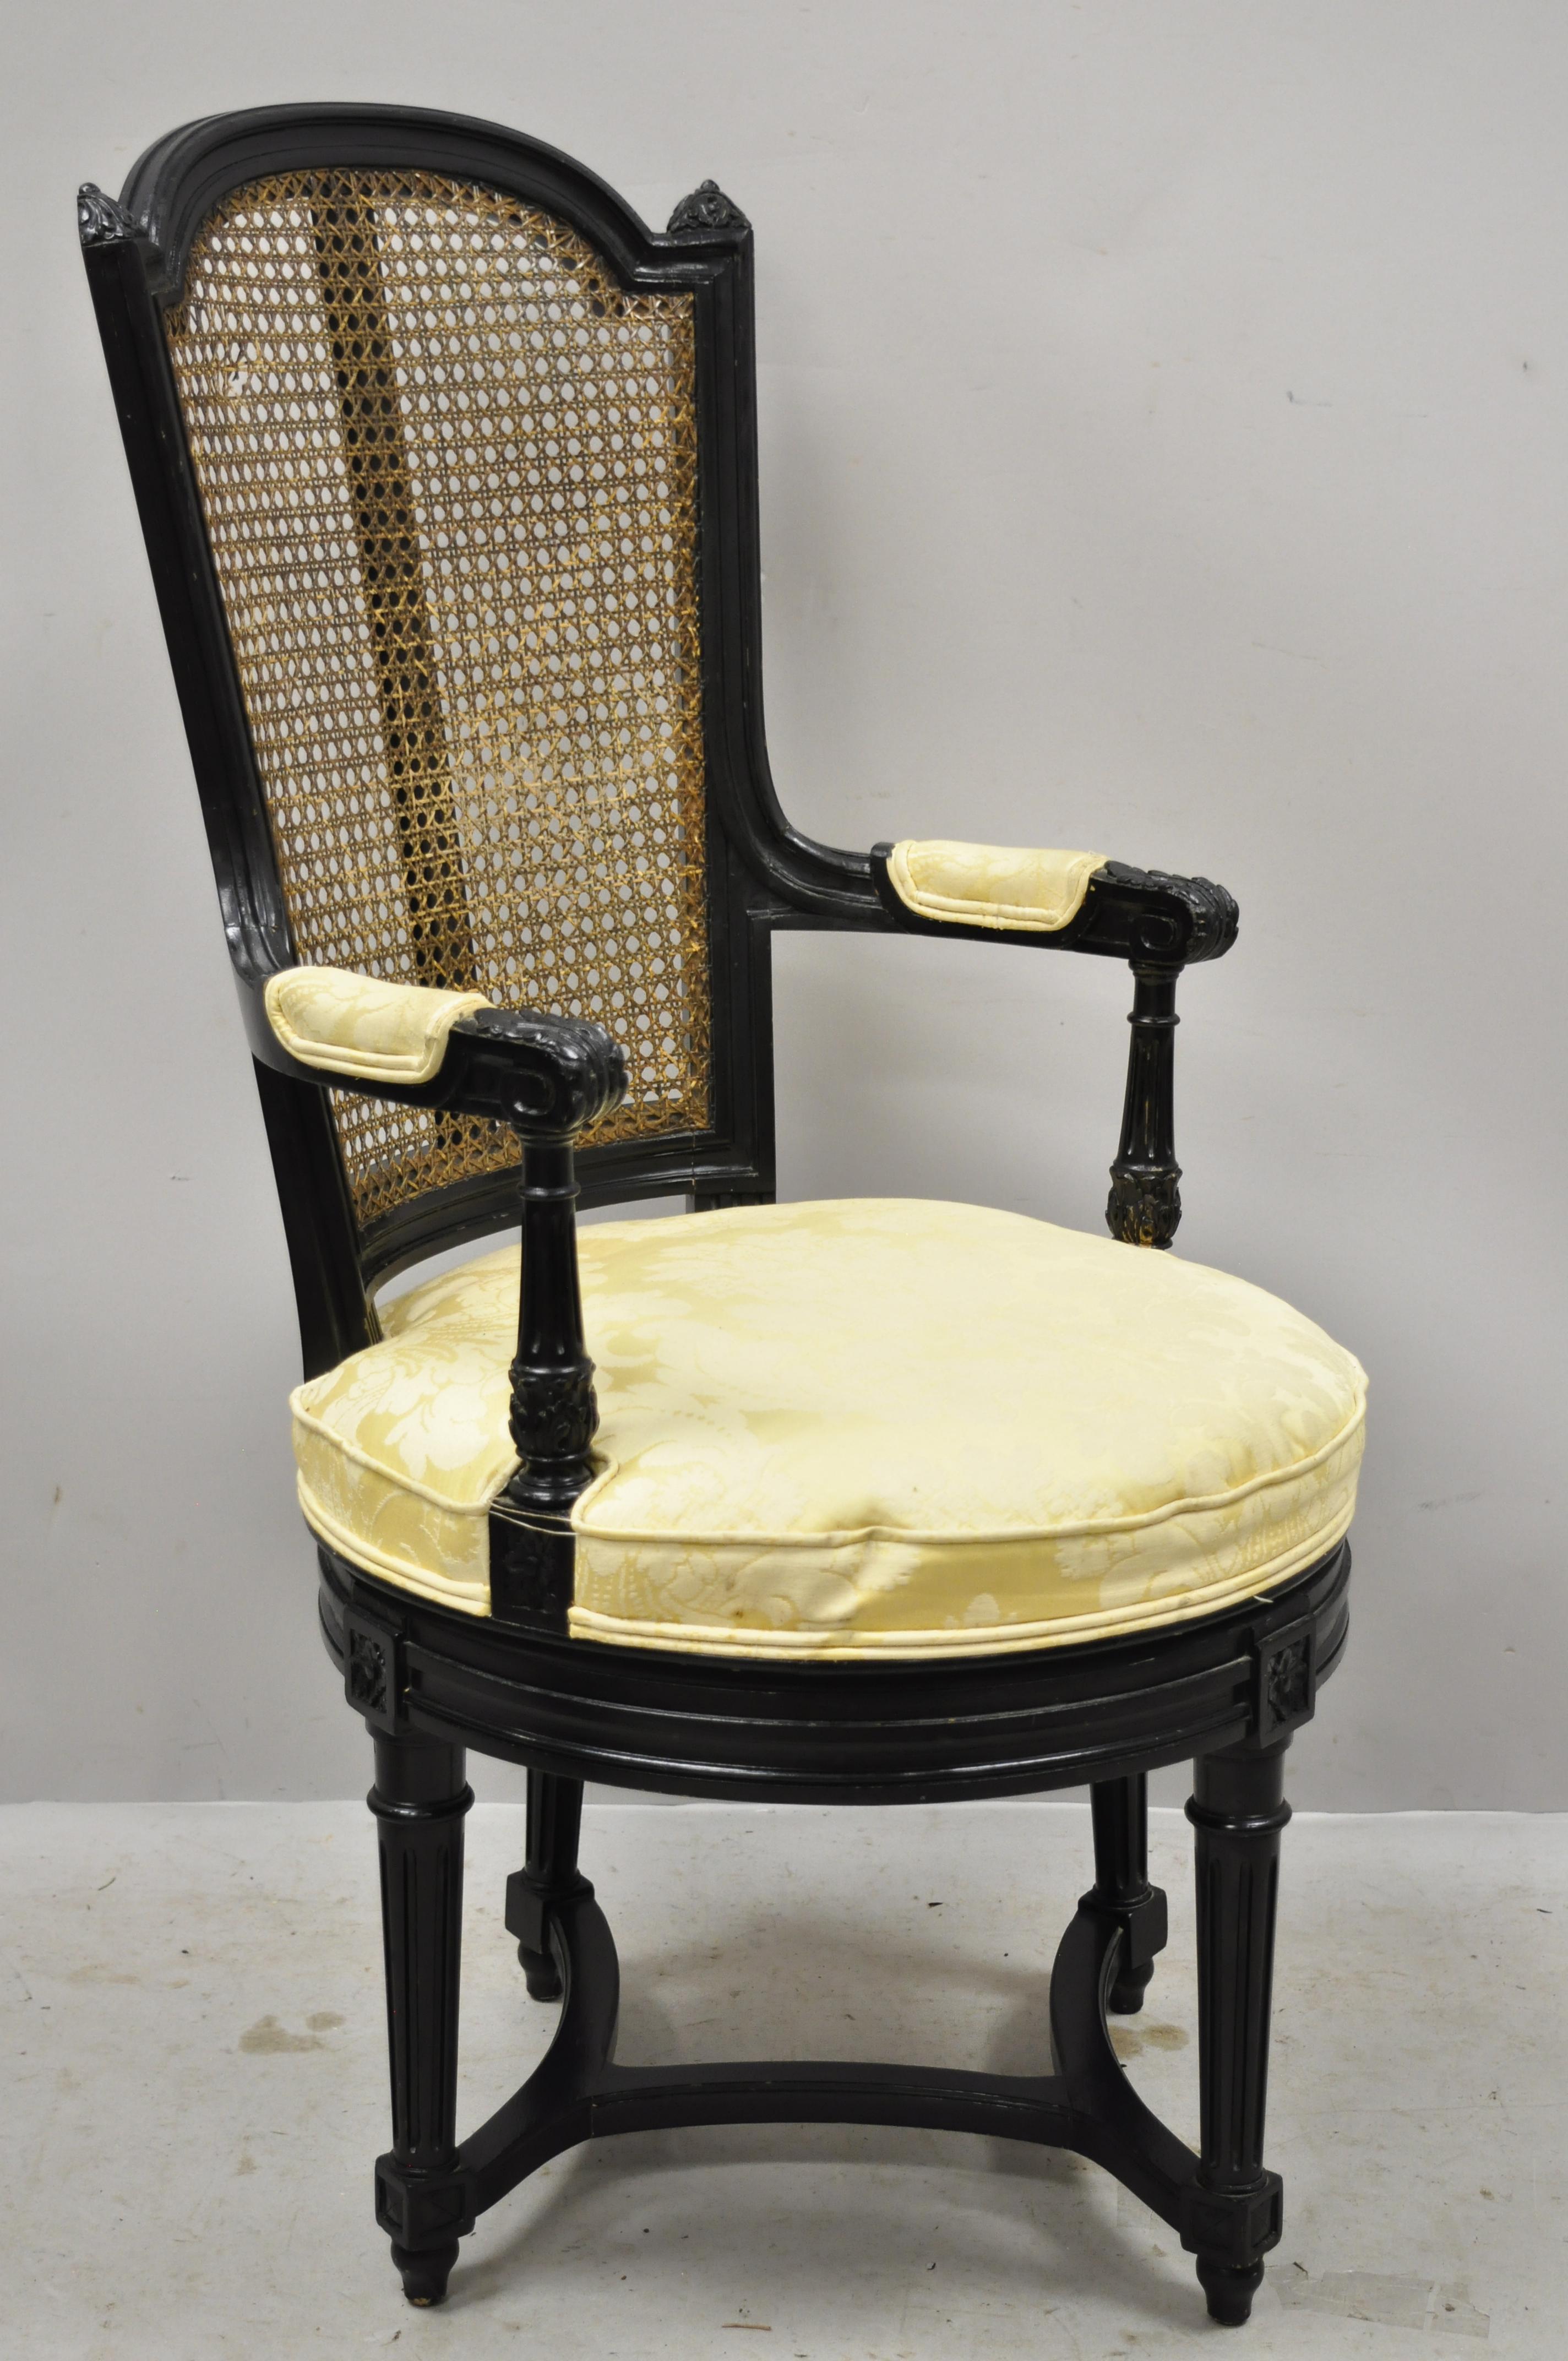 Vintage French Louis XVI style swivel seat cane back black ebonized vanity chair. Item features a swivel seat, cane back, stretcher base, solid wood frame, upholstered arm rests, nicely carved details, tapered legs, very nice antique item, great